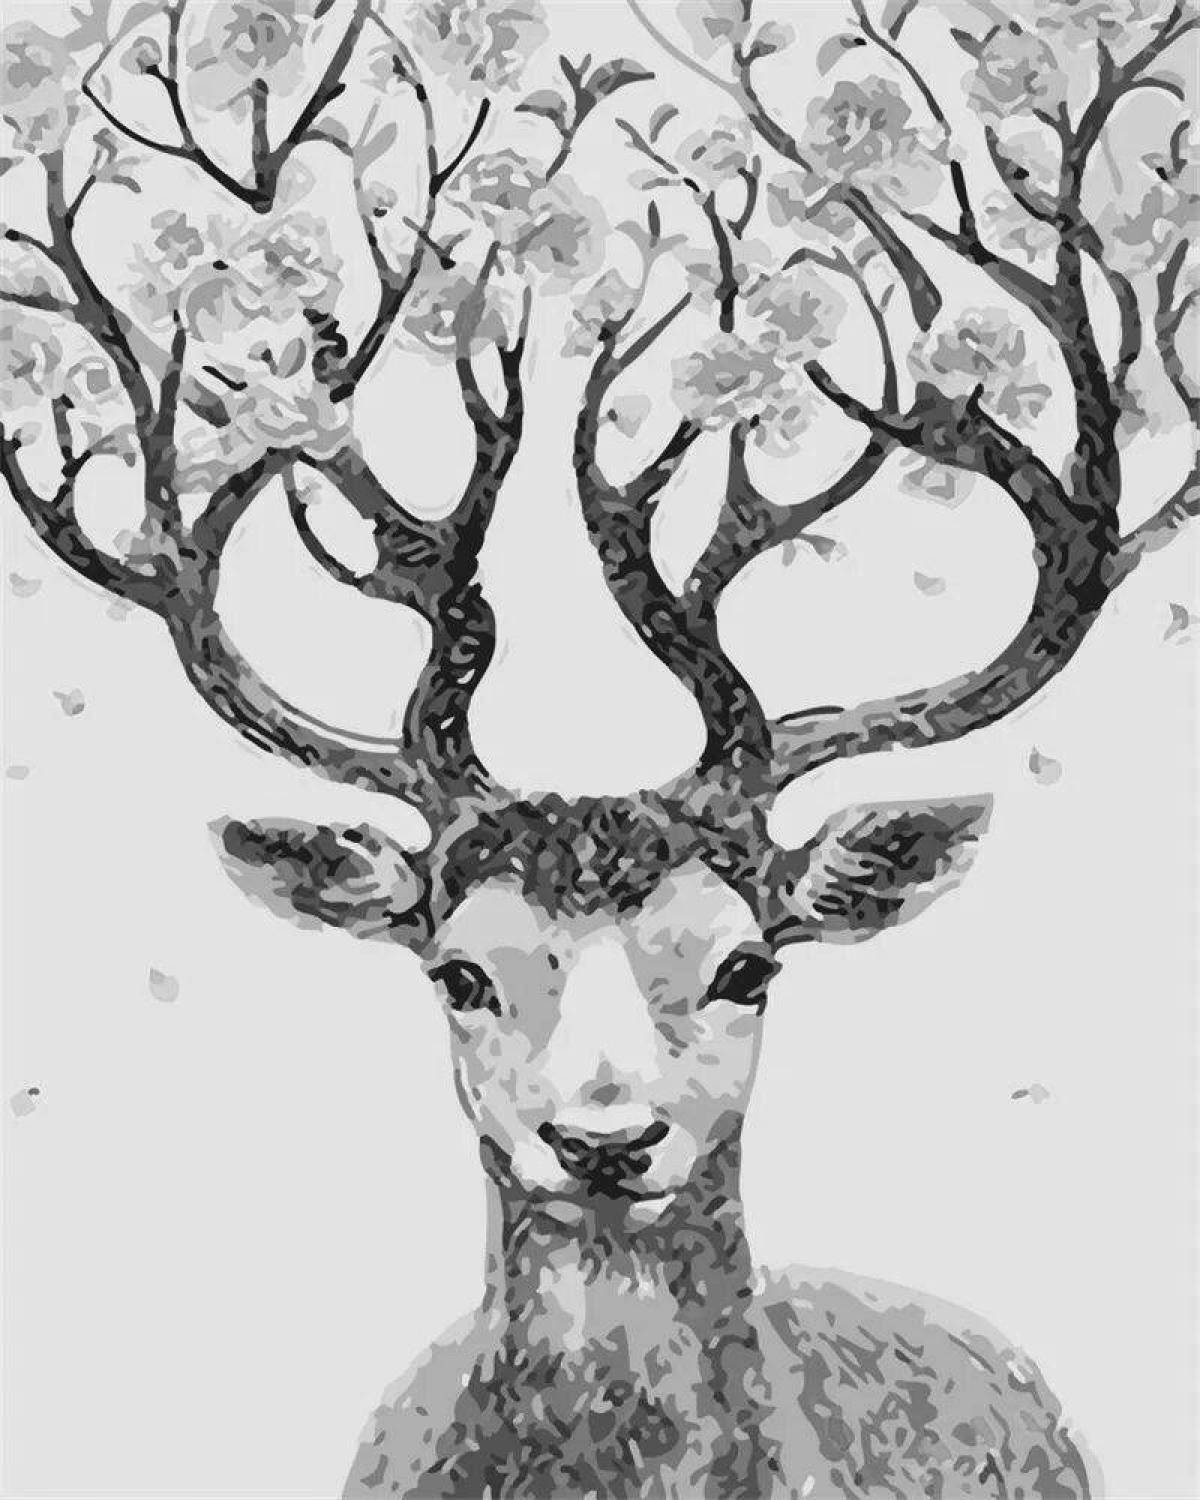 Exquisite deer coloring by numbers